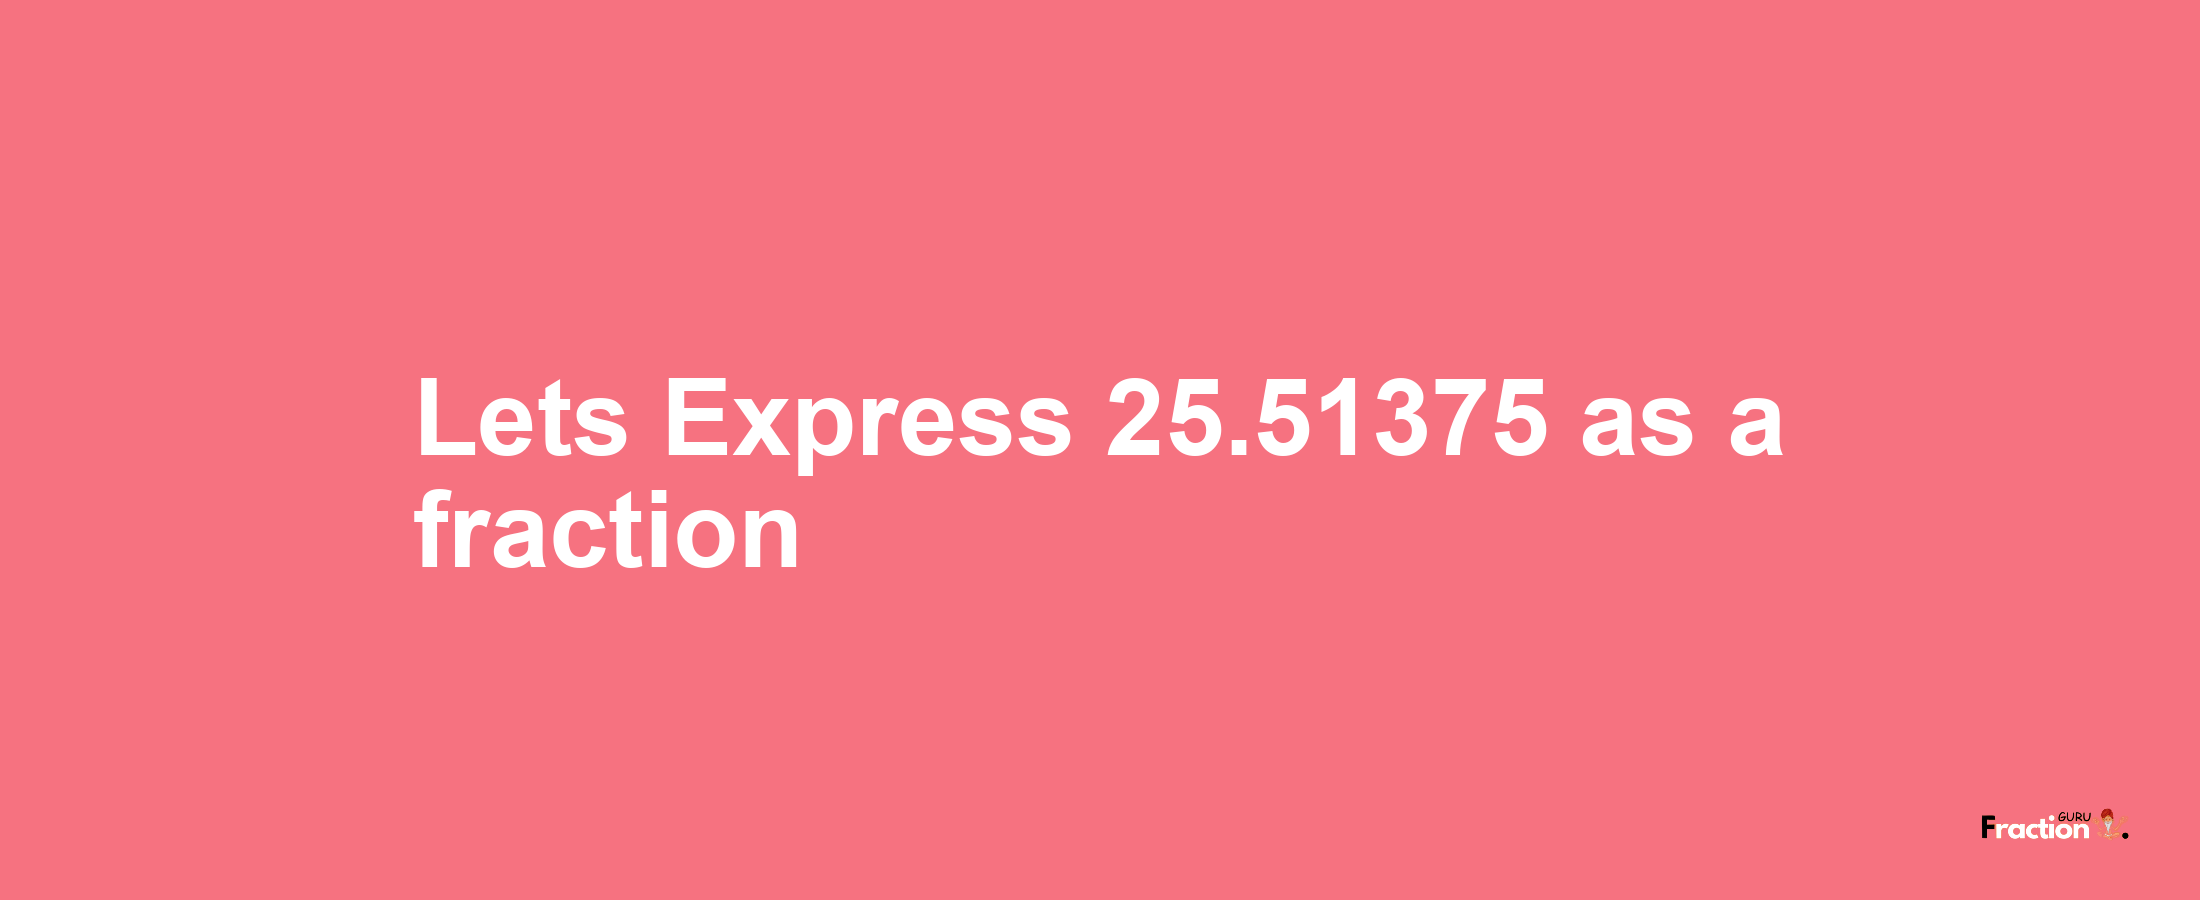 Lets Express 25.51375 as afraction